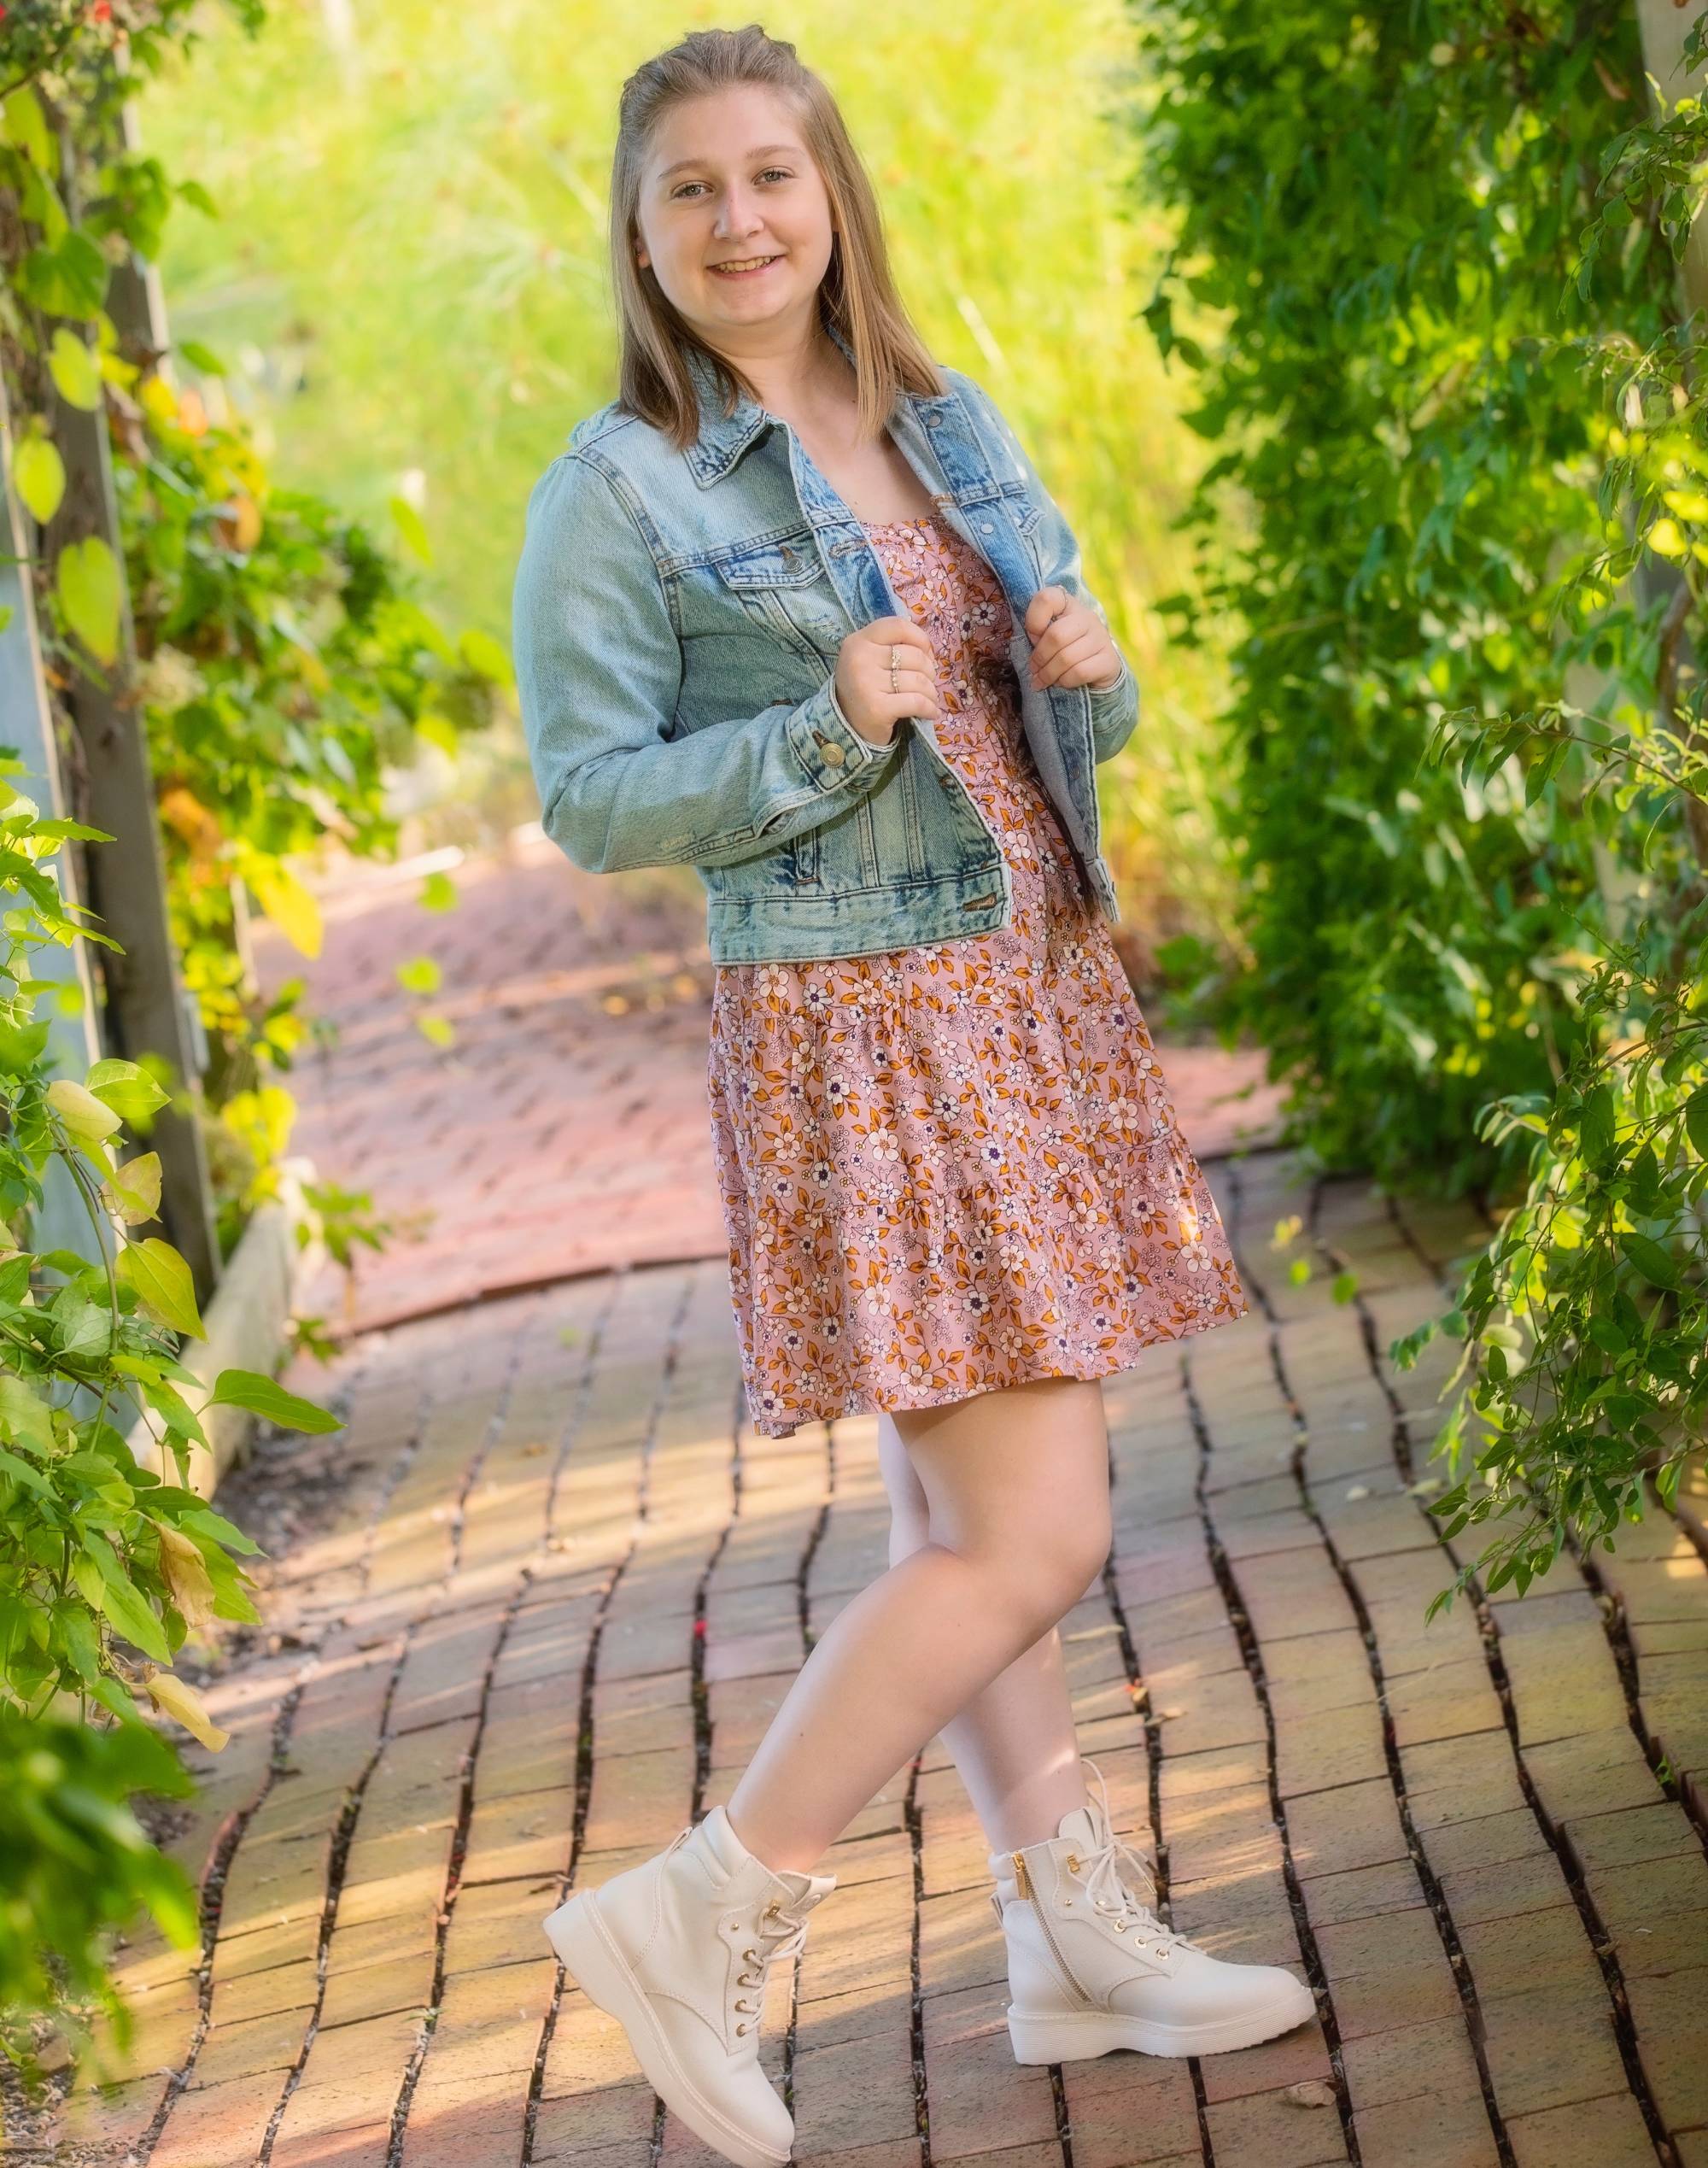 Kaley on a brick pathway during summer